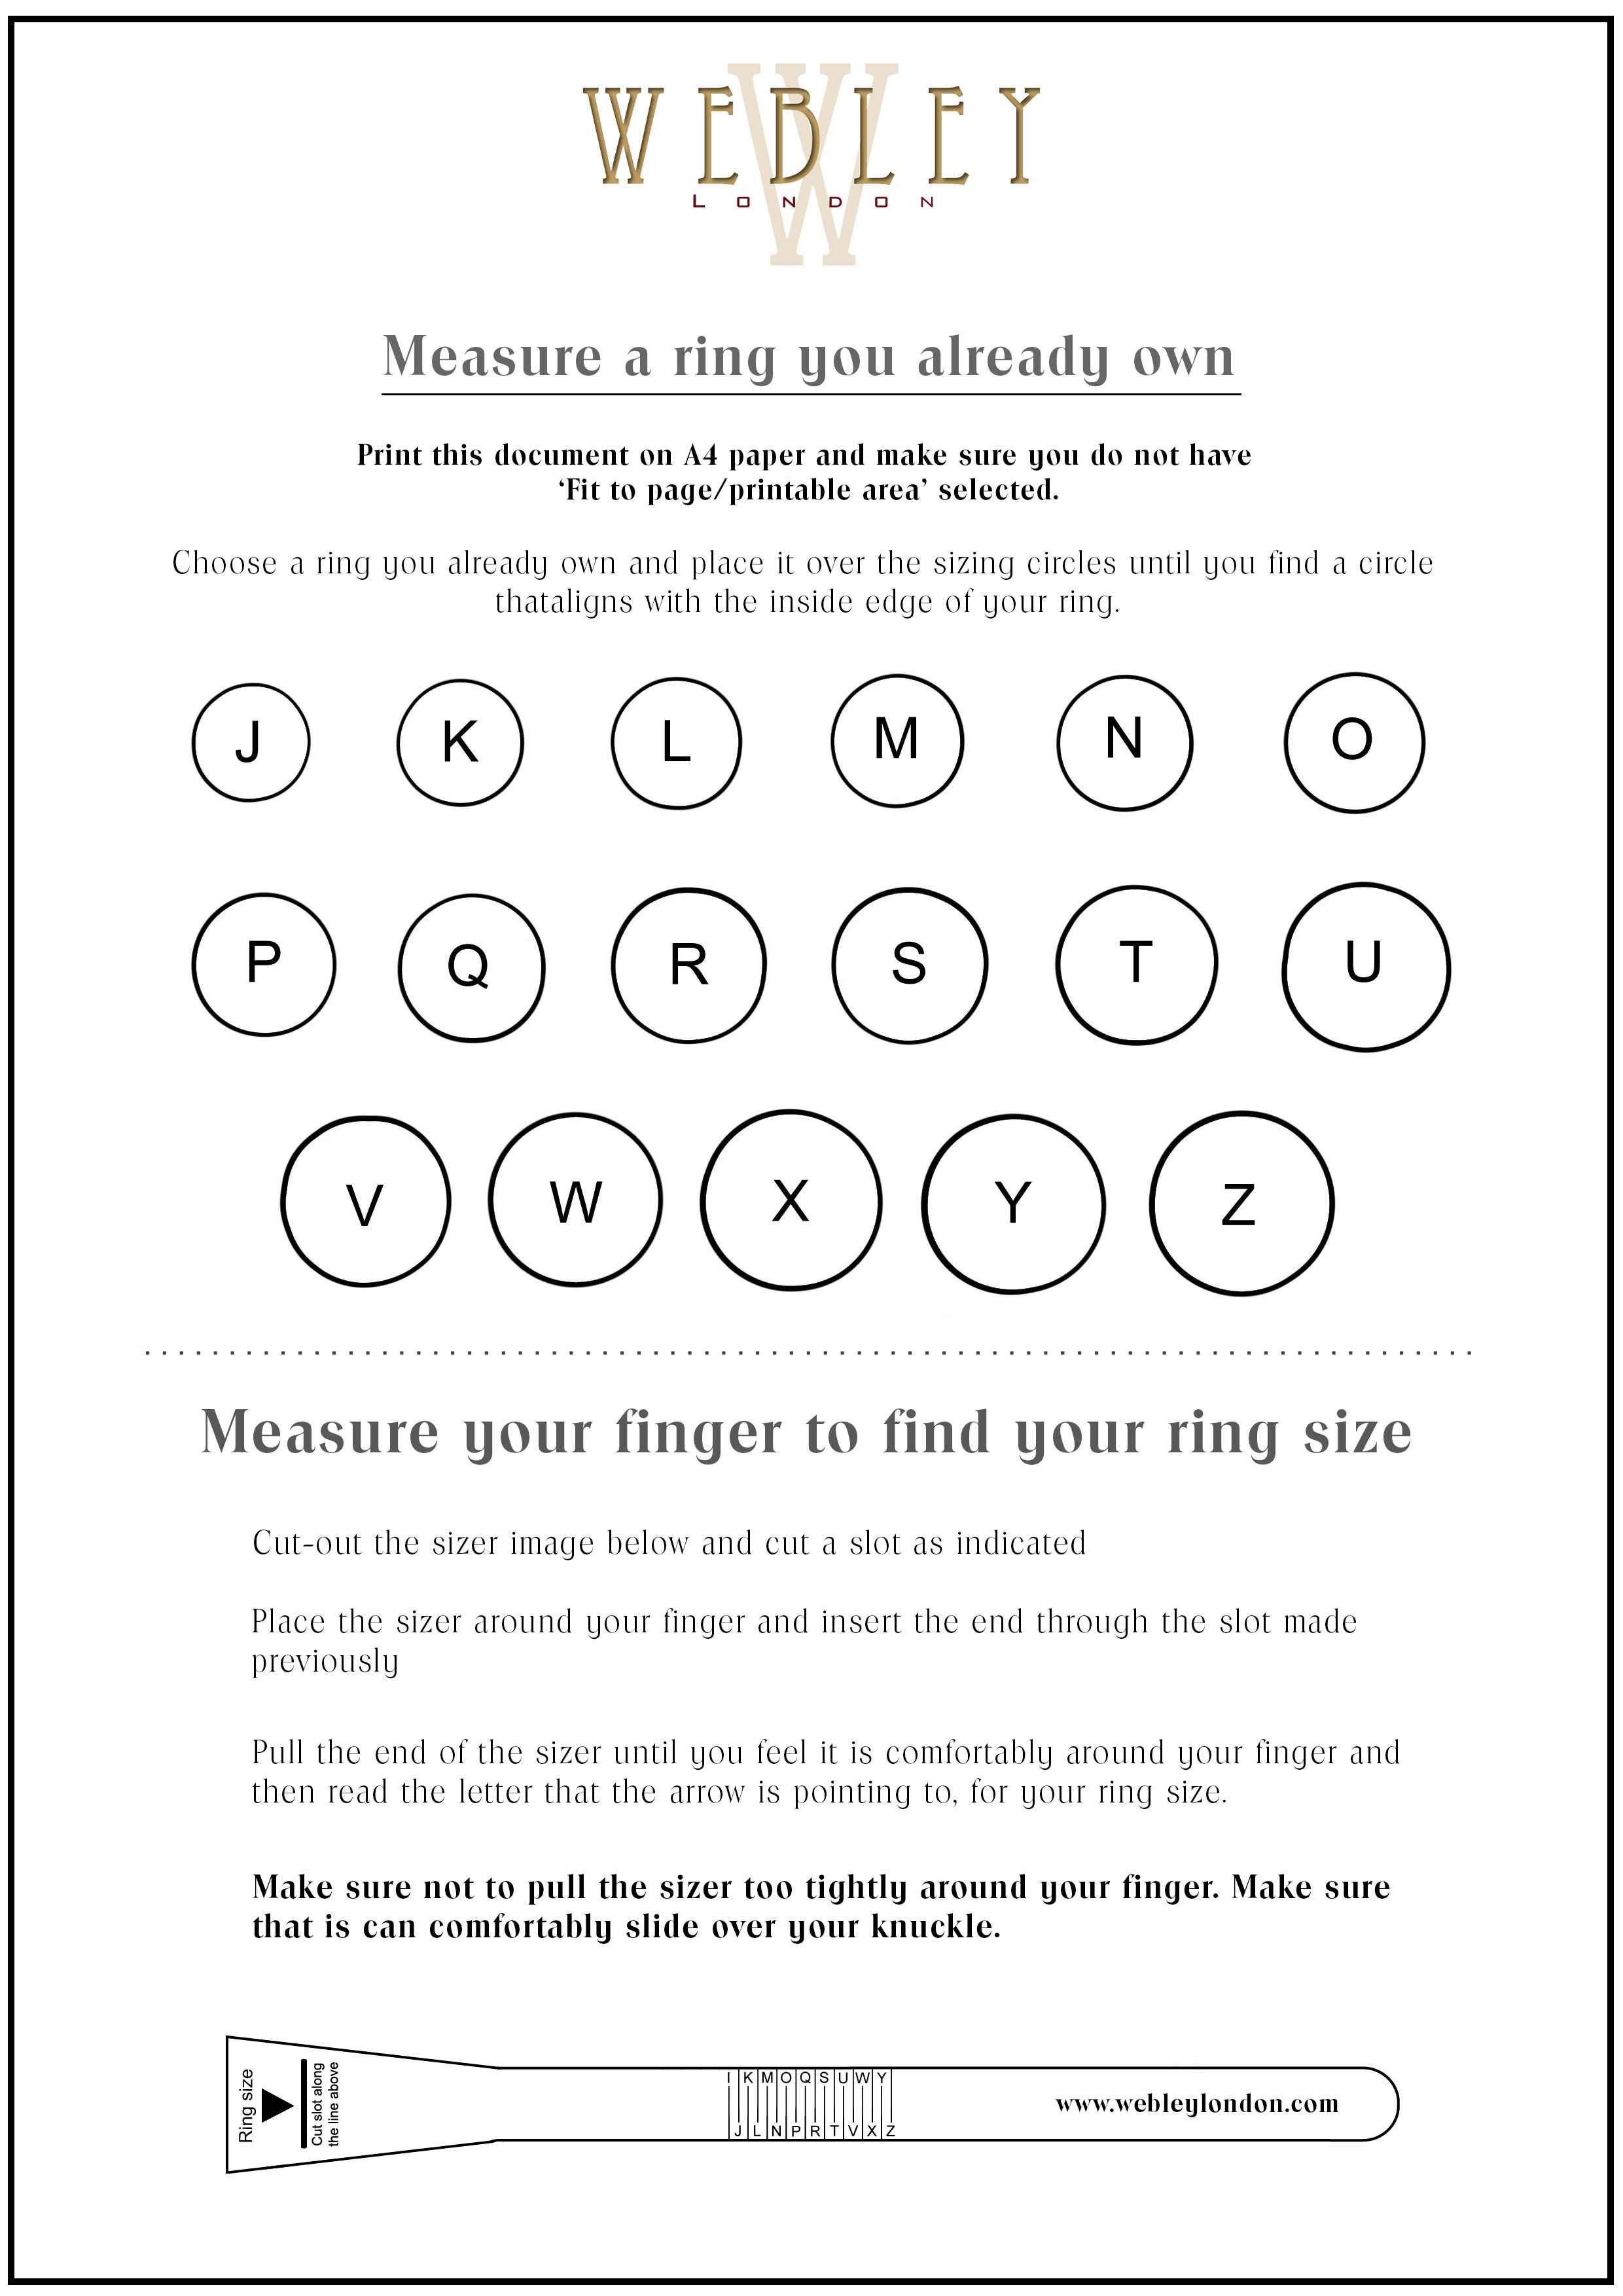 What's My Ring Size, Tips And Tricks to Ring Sizing